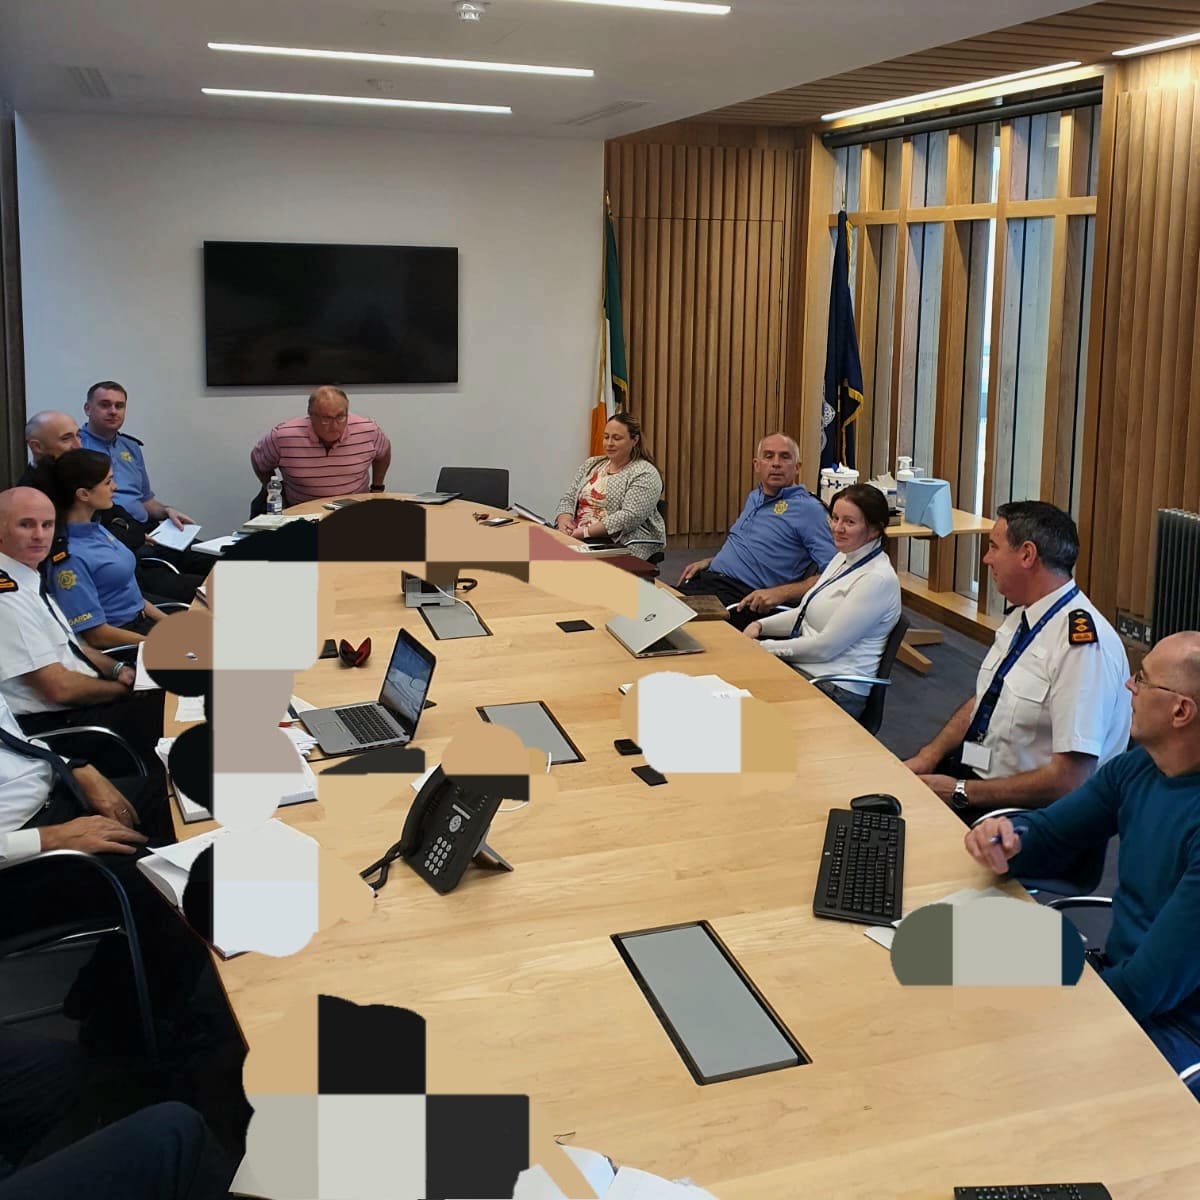 Delighted to meet with the Chief Superintendent @gardainfo in Wexford today along with his District Superintendents and clerical staff. Lots of discussion around communication with An Garda aswell as rural issues affecting farmers @JerOMahony2021 @IFAmedia